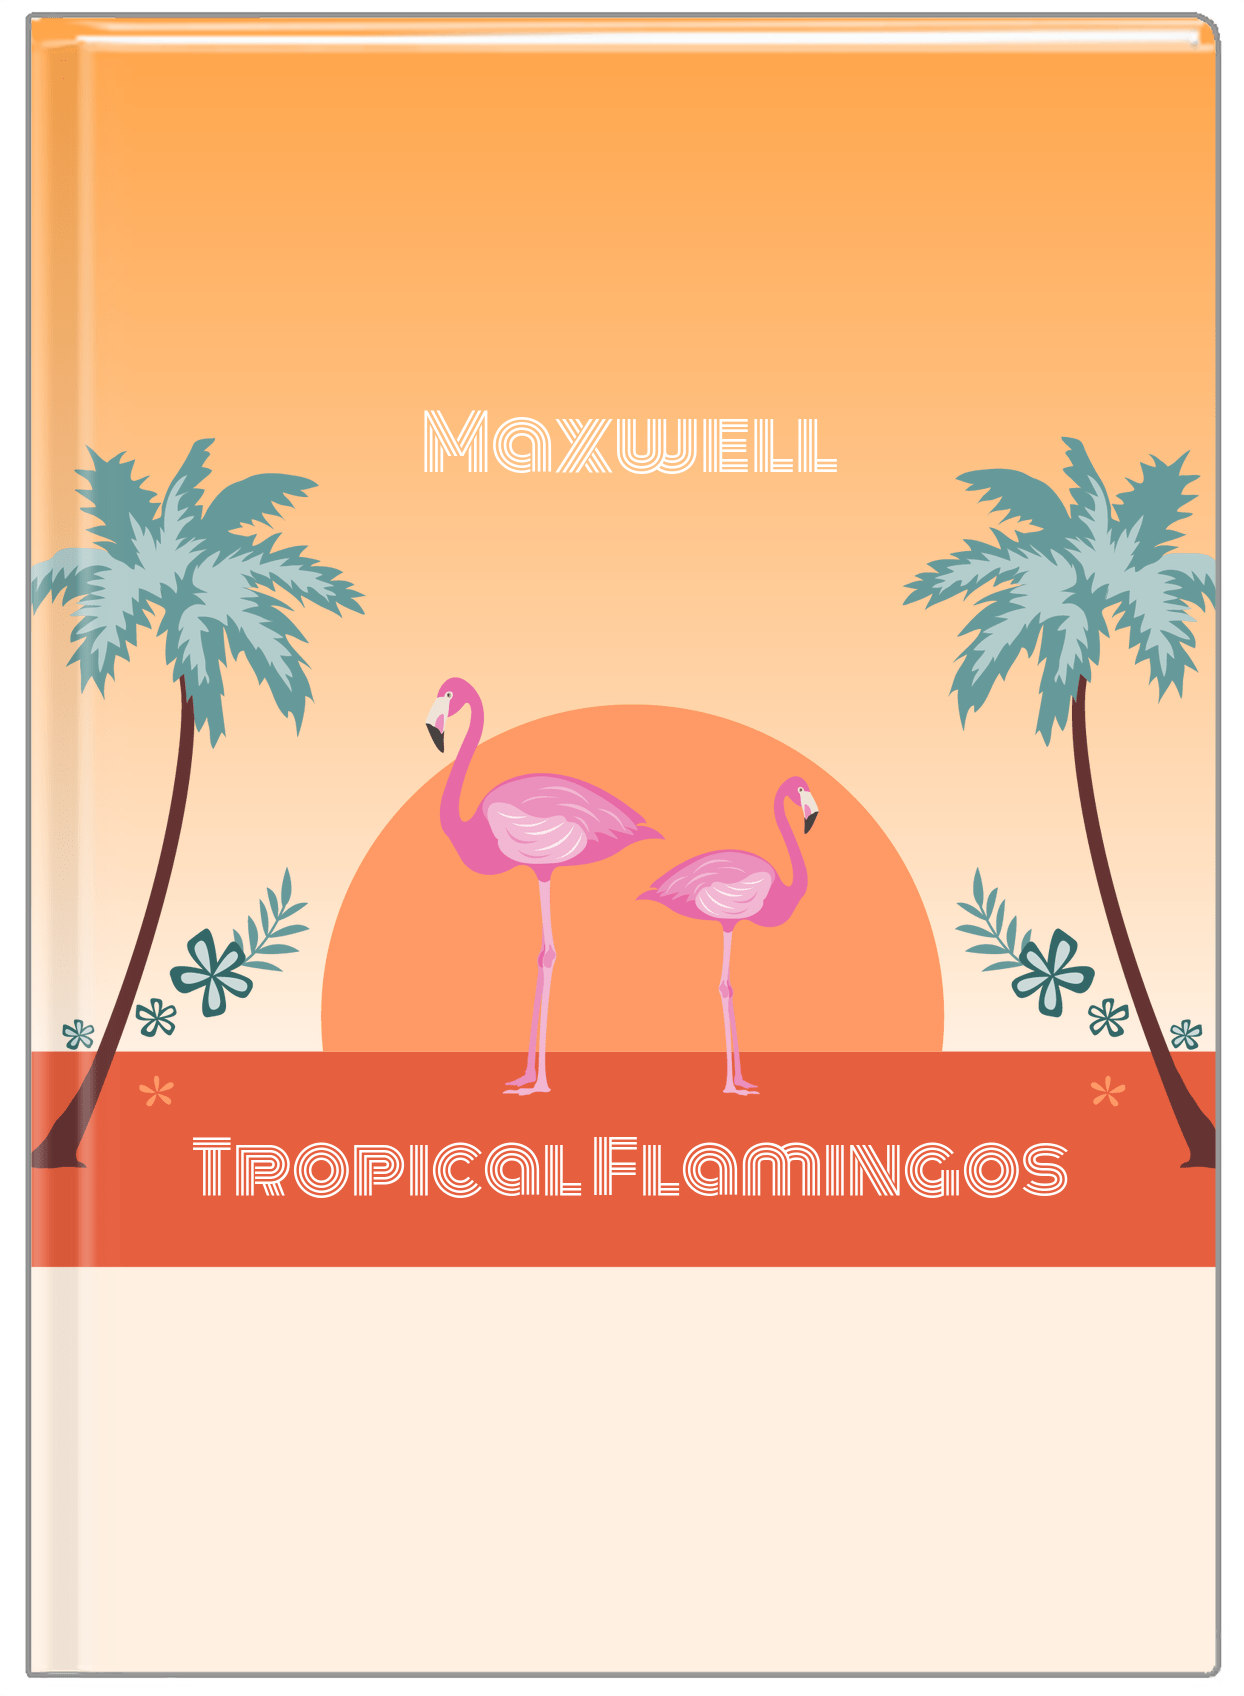 Personalized Flamingos Journal II - Tropical - Orange Background - Front View